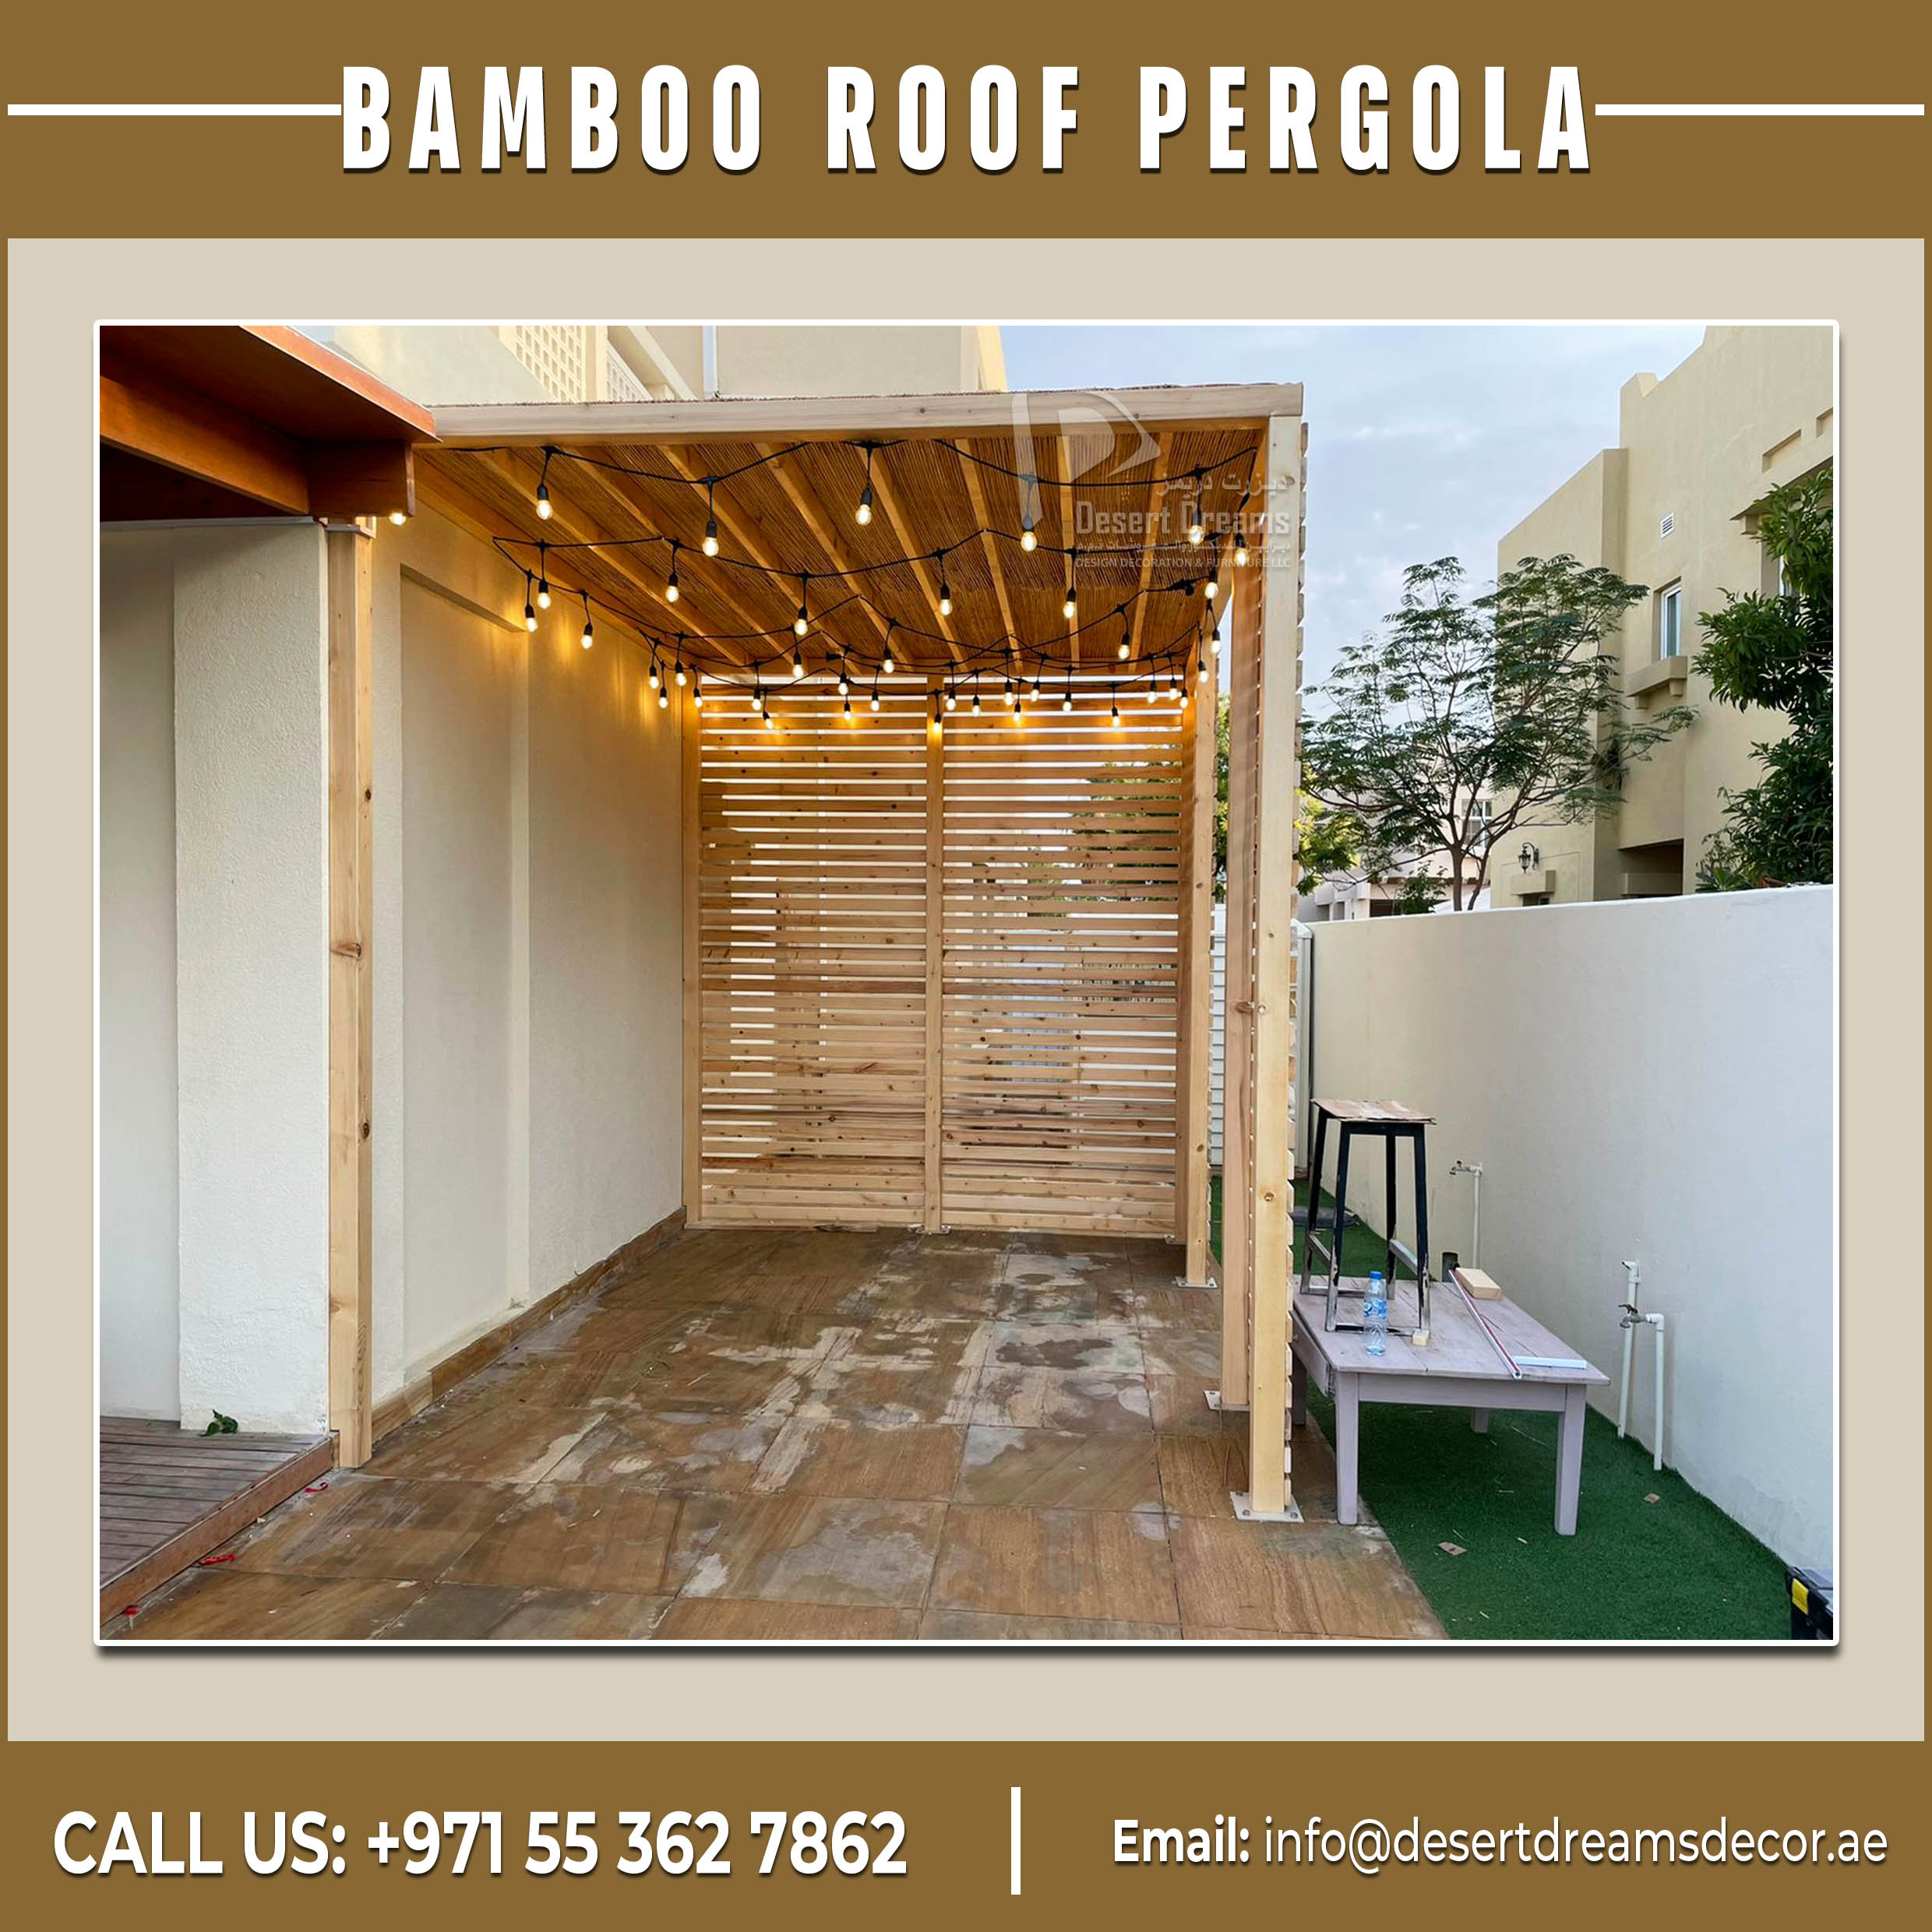 Supply and Install Bamboo Roofing Pergola in UAE (2).jpg